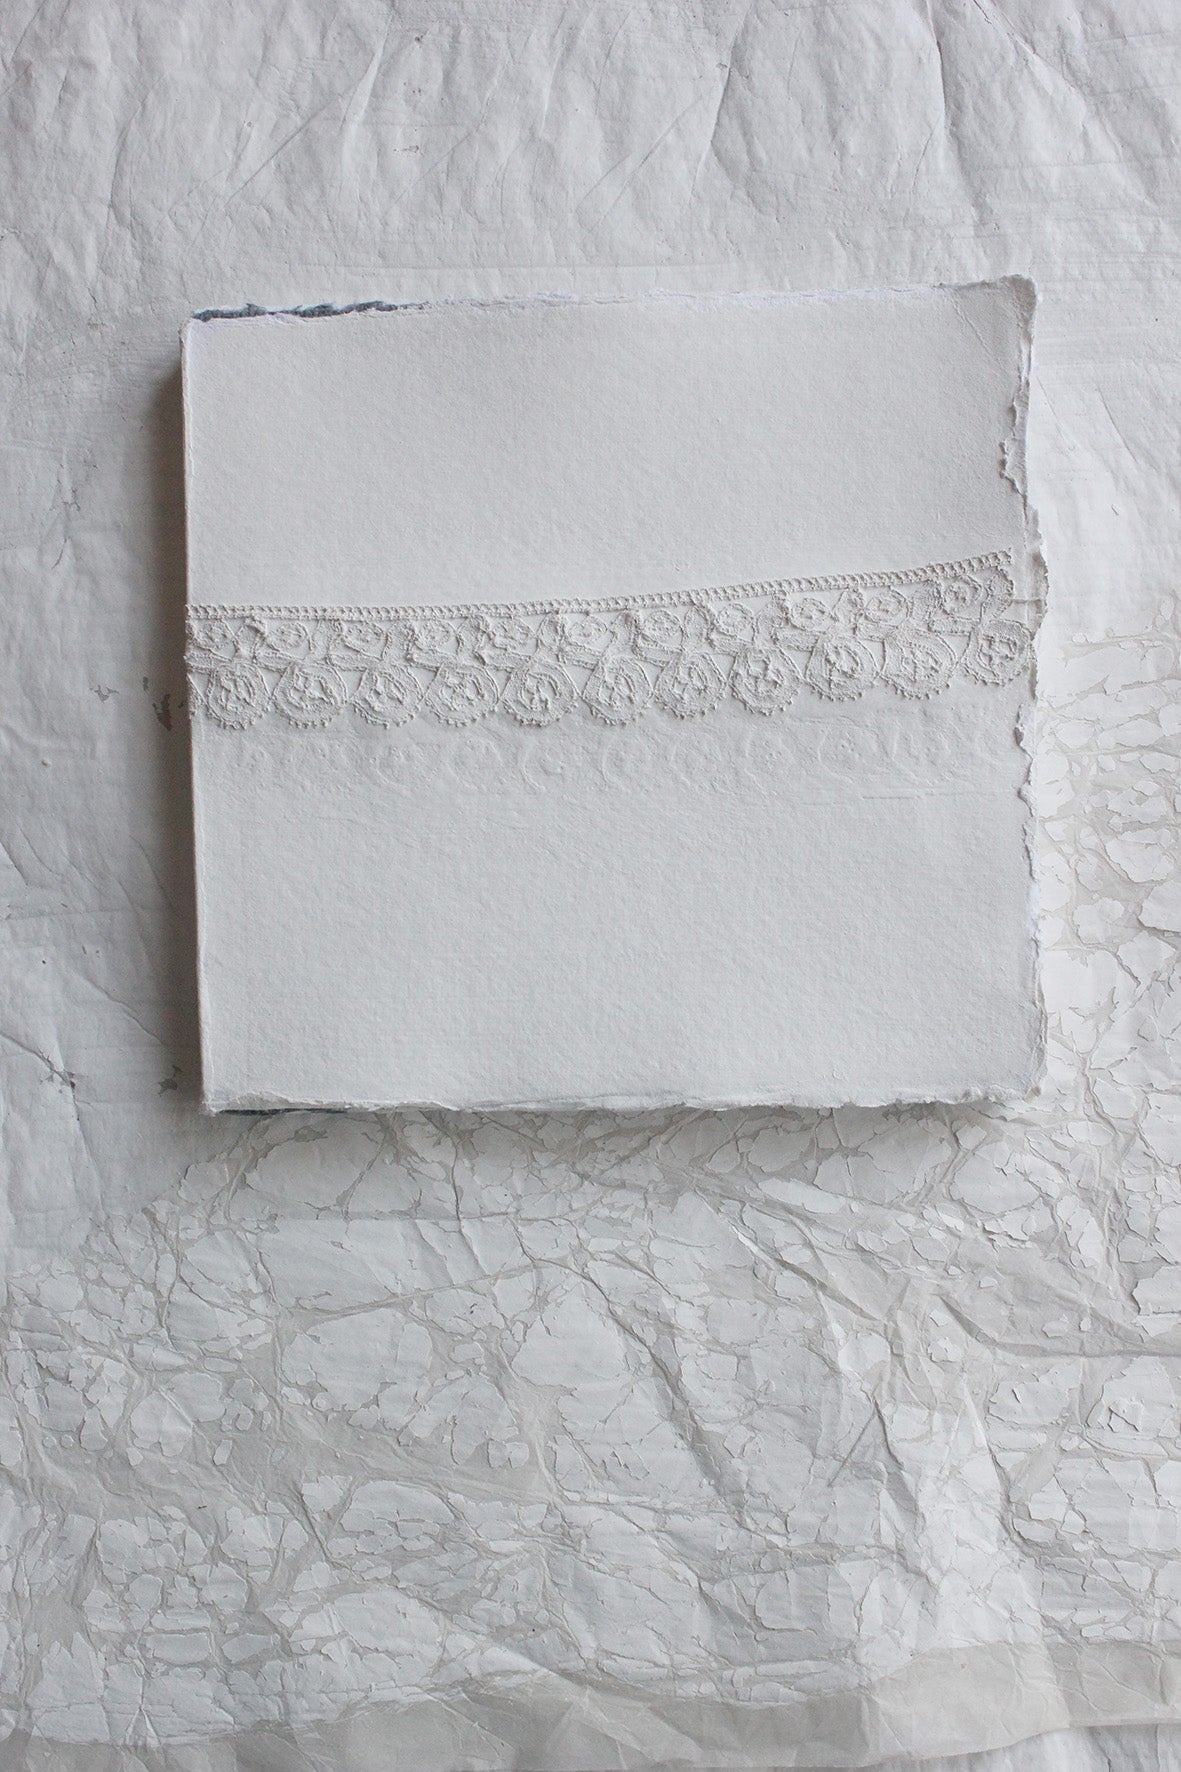 Hand Made Paper Blank Journal - Border Lace - Small